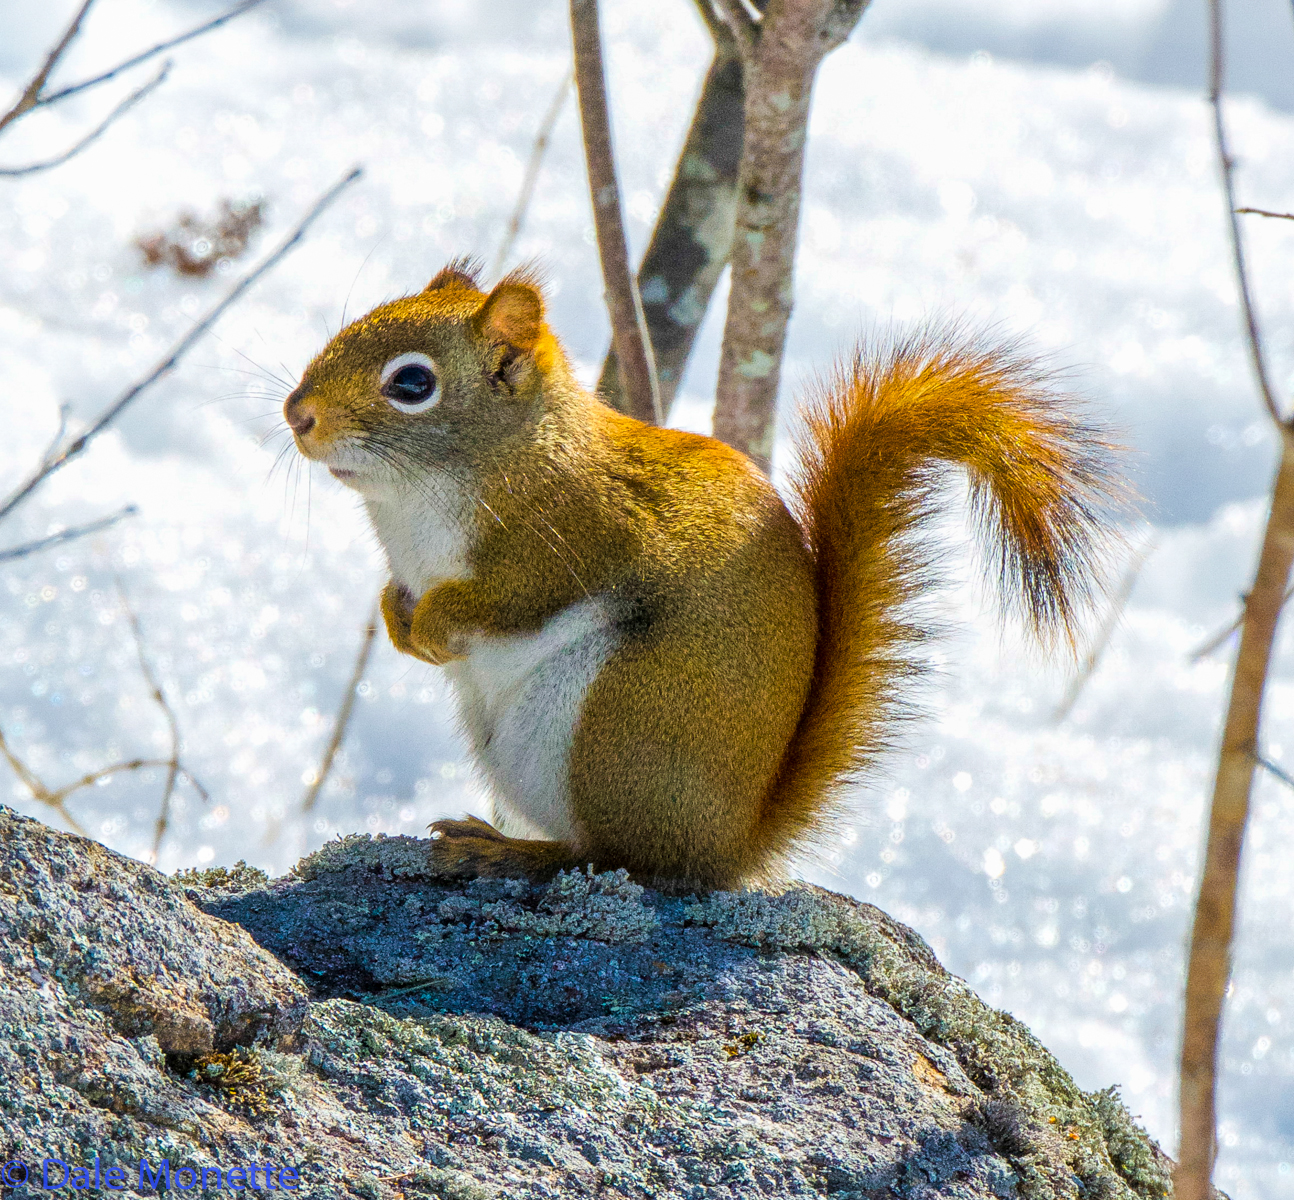   Red squirrels are very common and can be heard chattering everywhere around Quabbin where there are pine and spruce trees.  